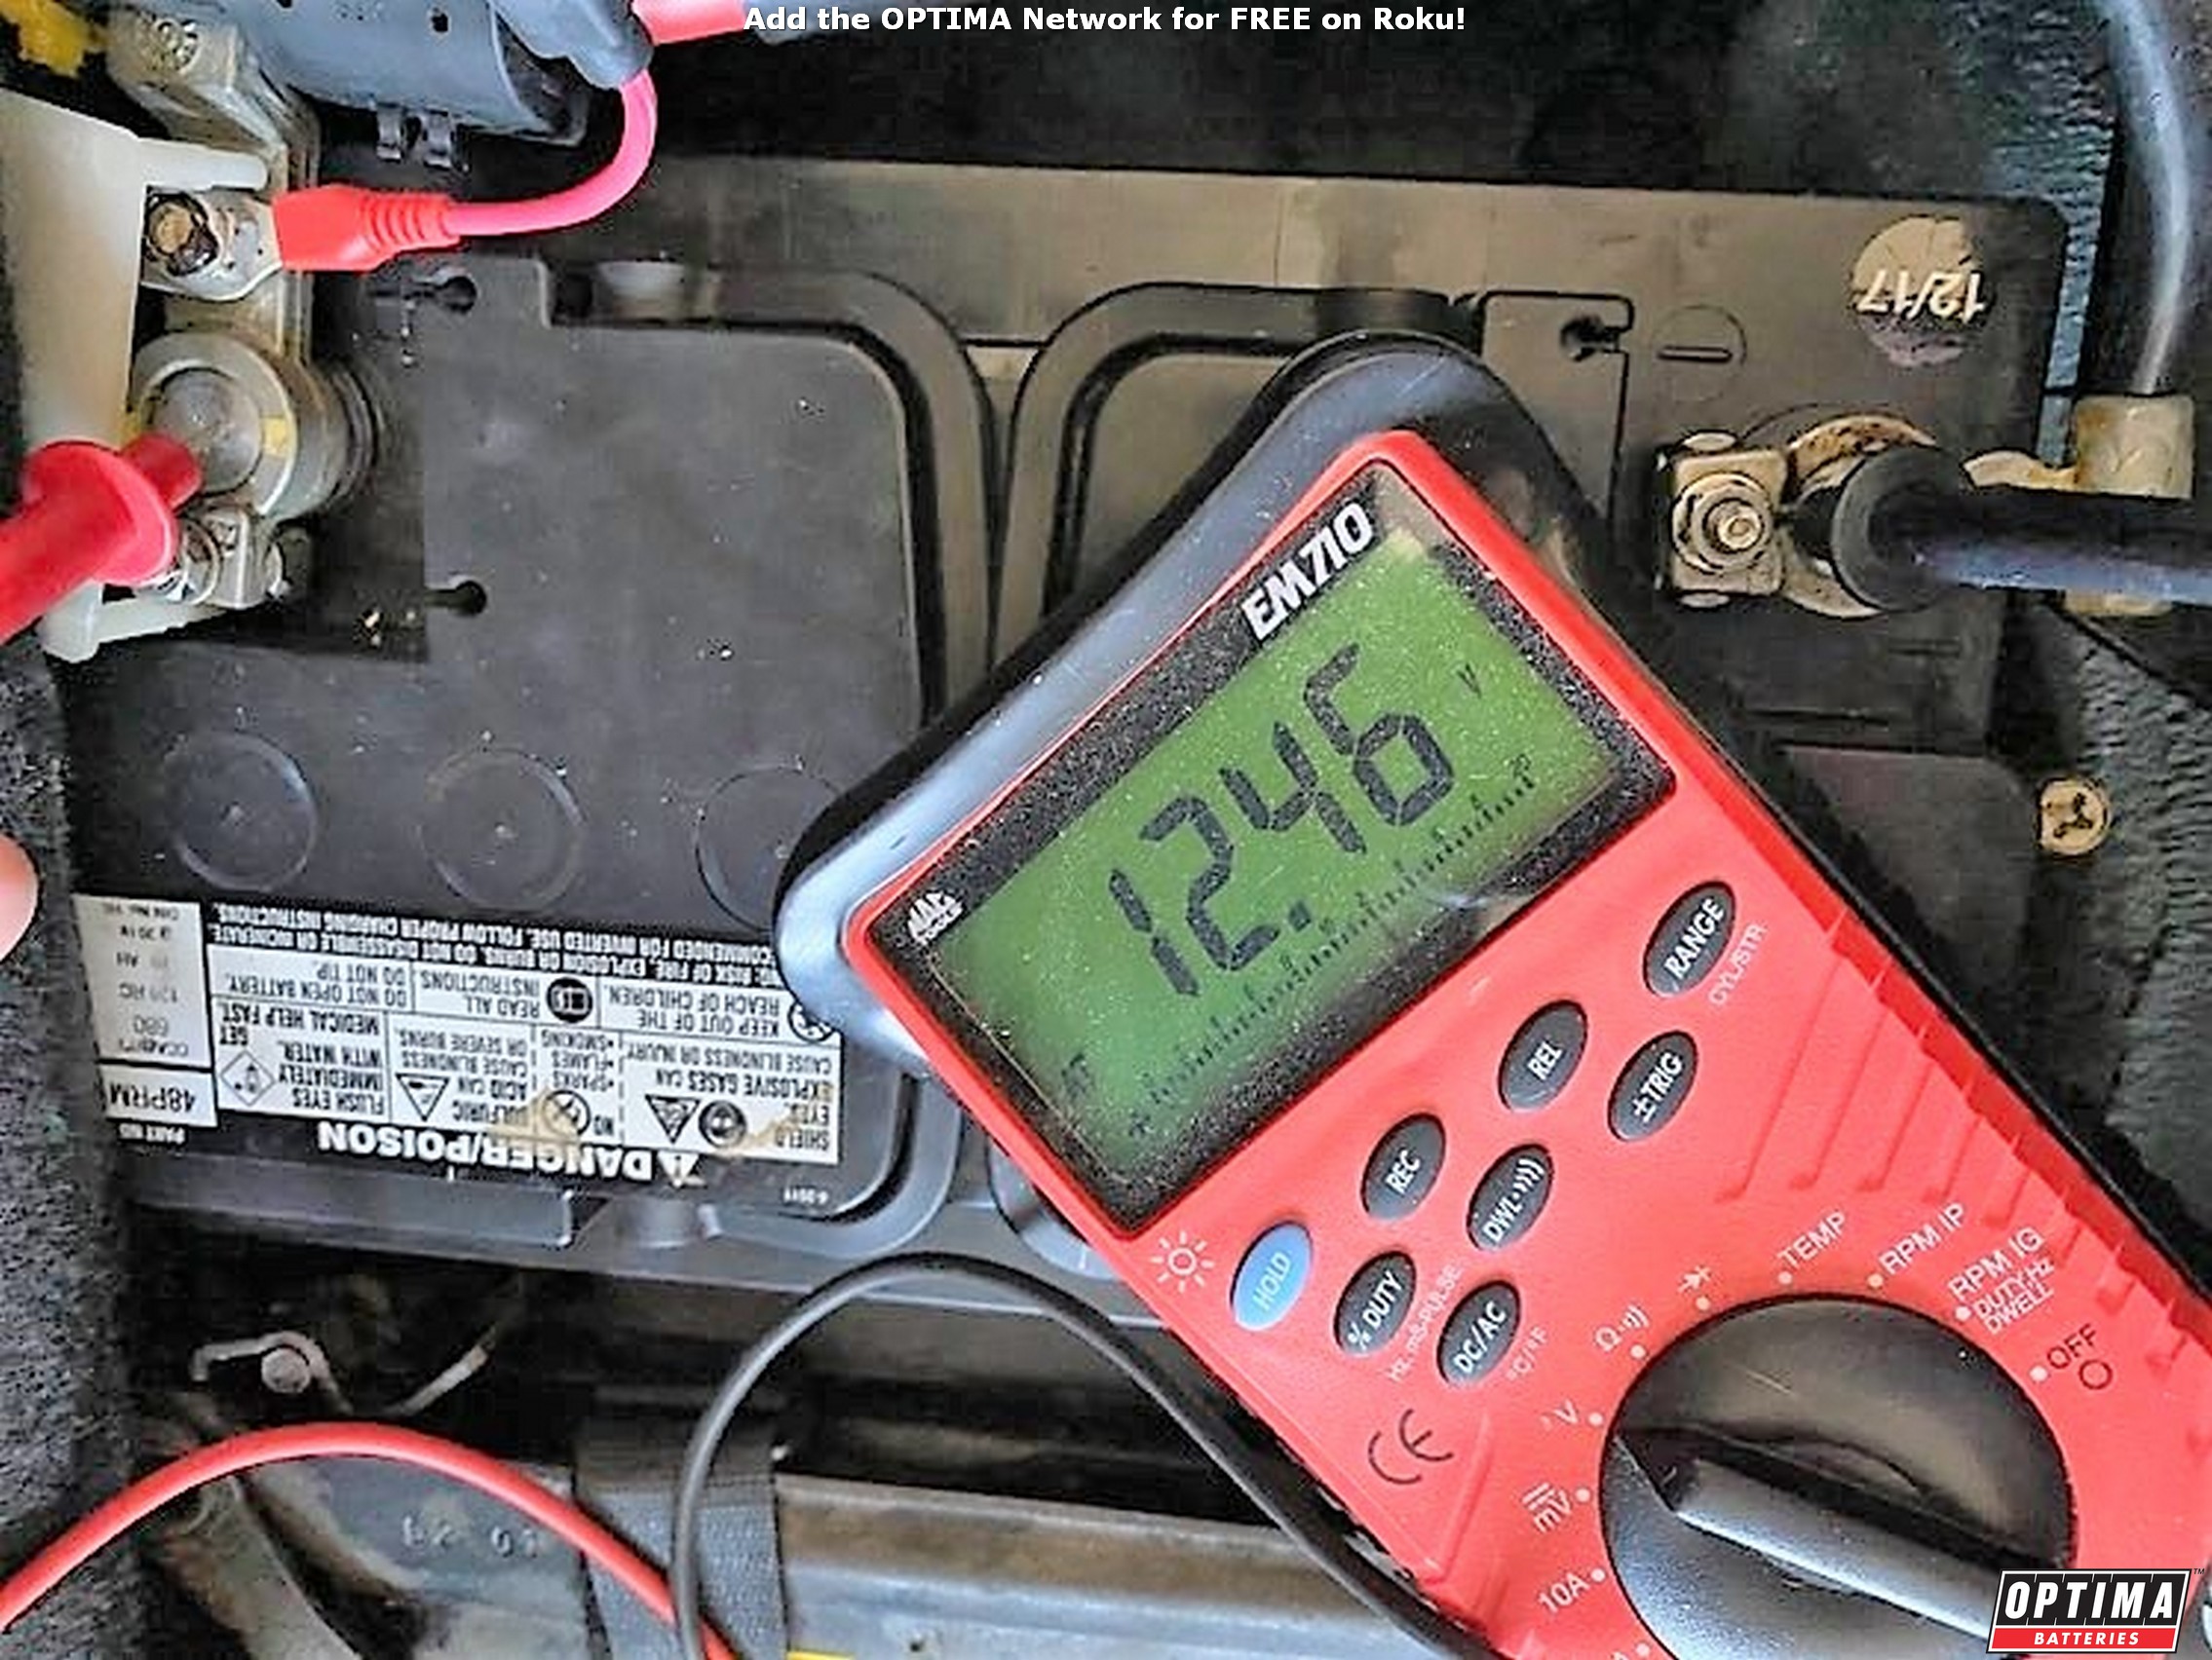 https://www.optimabatteries.com/images/default-source/experience/can-a-12v-battery-lose-voltage-after-not-starting-a-car-for-a-week-jpg.jpg?sfvrsn=114ee798_0